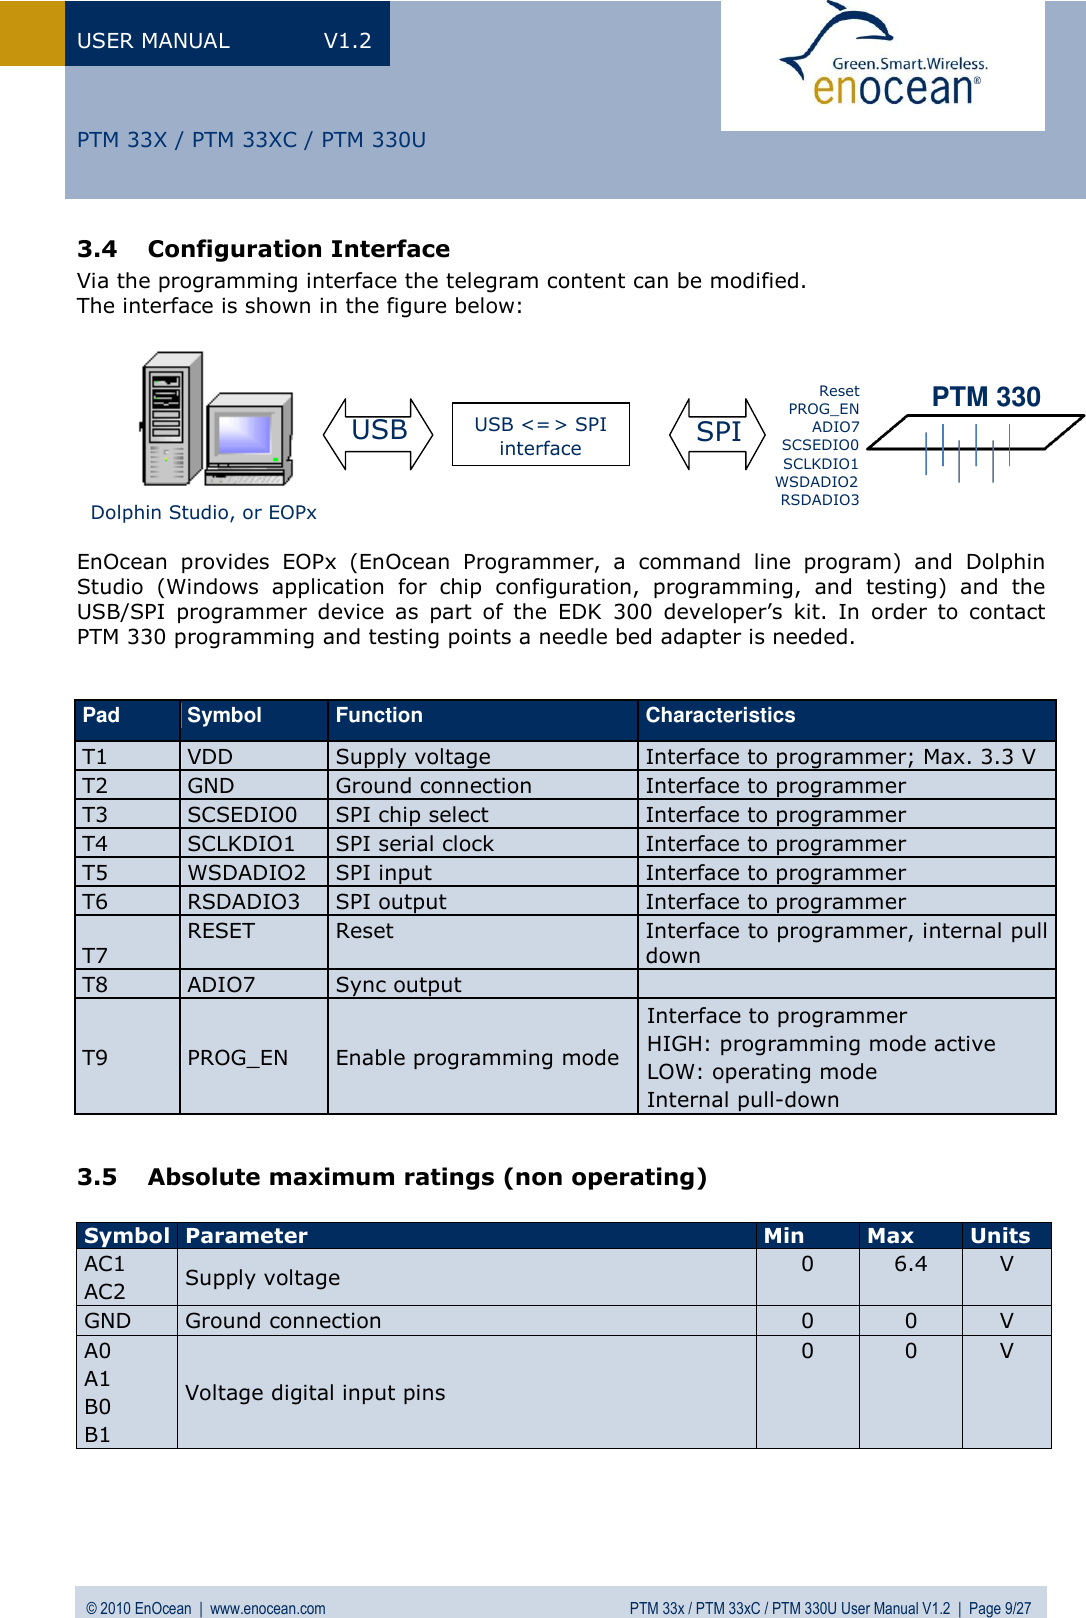 USER MANUAL  V1.2 © 2010 EnOcean  |  www.enocean.com  PTM 33x / PTM 33xC / PTM 330U User Manual V1.2  |  Page 9/27   PTM 33X / PTM 33XC / PTM 330U 3.4 Configuration Interface Via the programming interface the telegram content can be modified.  The interface is shown in the figure below:  EnOcean  provides  EOPx  (EnOcean  Programmer,  a  command  line  program)  and  Dolphin Studio  (Windows  application  for  chip  configuration,  programming,  and  testing)  and  the USB/SPI  programmer  device  as  part  of  the  EDK  300  developer’s  kit.  In  order  to  contact PTM 330 programming and testing points a needle bed adapter is needed.   Pad Symbol Function Characteristics T1 VDD Supply voltage  Interface to programmer; Max. 3.3 V T2 GND Ground connection Interface to programmer T3 SCSEDIO0 SPI chip select Interface to programmer T4 SCLKDIO1 SPI serial clock Interface to programmer T5 WSDADIO2 SPI input Interface to programmer T6 RSDADIO3 SPI output Interface to programmer T7 RESET Reset Interface to programmer, internal pull down T8 ADIO7 Sync output  T9 PROG_EN Enable programming mode  Interface to programmer   HIGH: programming mode active  LOW: operating mode  Internal pull-down  3.5 Absolute maximum ratings (non operating)  Symbol Parameter Min Max Units AC1 AC2 Supply voltage  0 6.4 V GND Ground connection 0 0 V A0 A1 B0 B1 Voltage digital input pins  0 0 V USB &lt;= &gt; SPI interface SPI USB Dolphin Studio, or EOPx Reset PROG_EN ADIO7 SCSEDIO0 SCLKDIO1 WSDADIO2 RSDADIO3 PTM PTM 330 